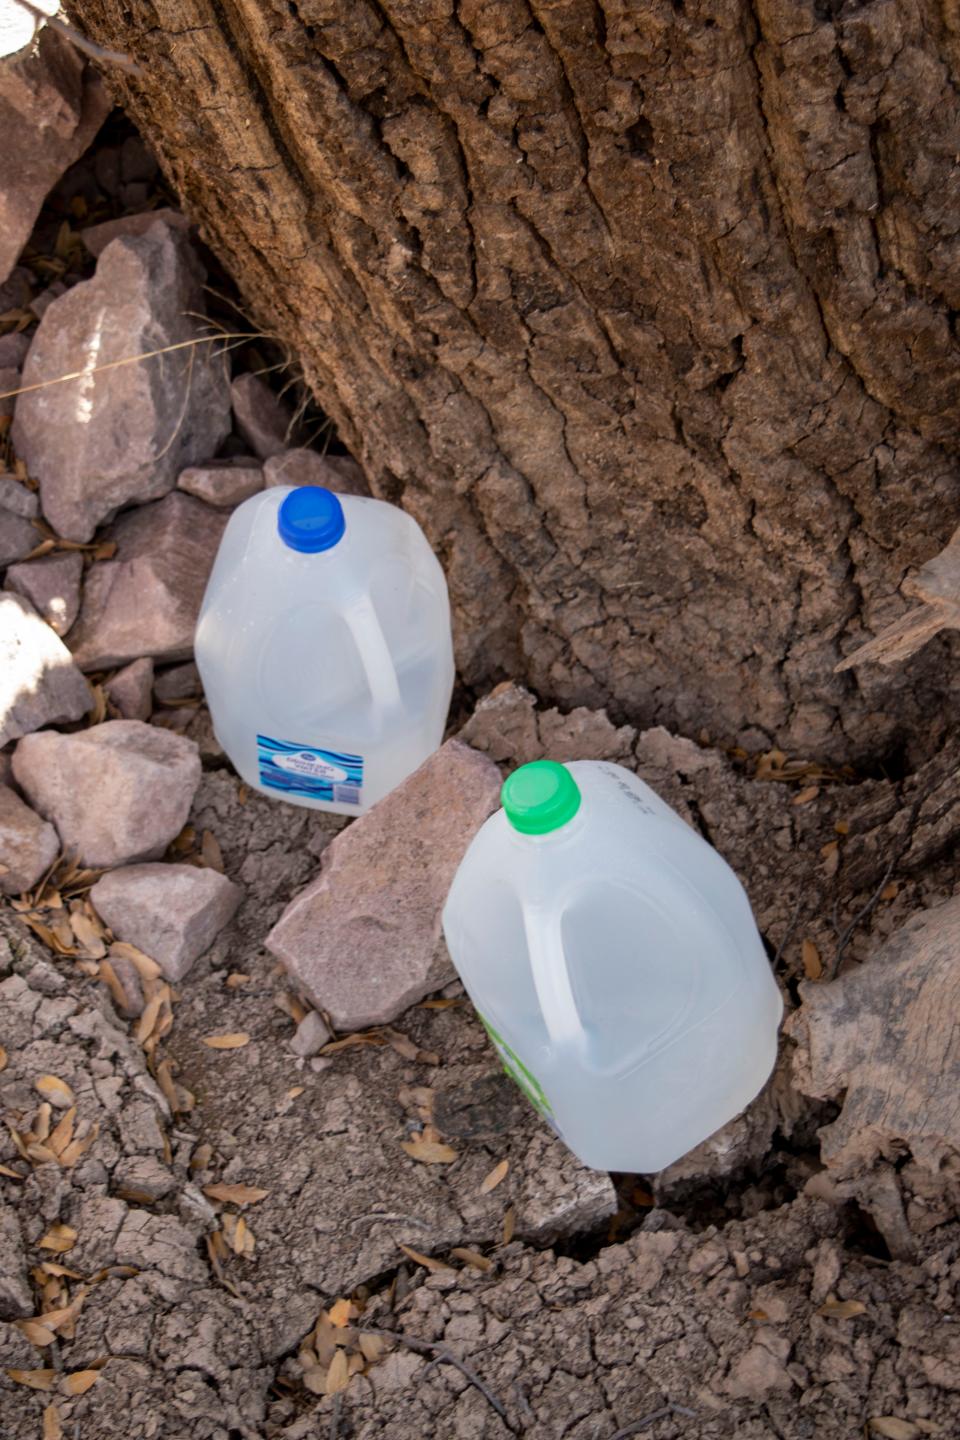 Water gallons placed along the Arizona border by a volunteer to help those crossing the border from Mexico.